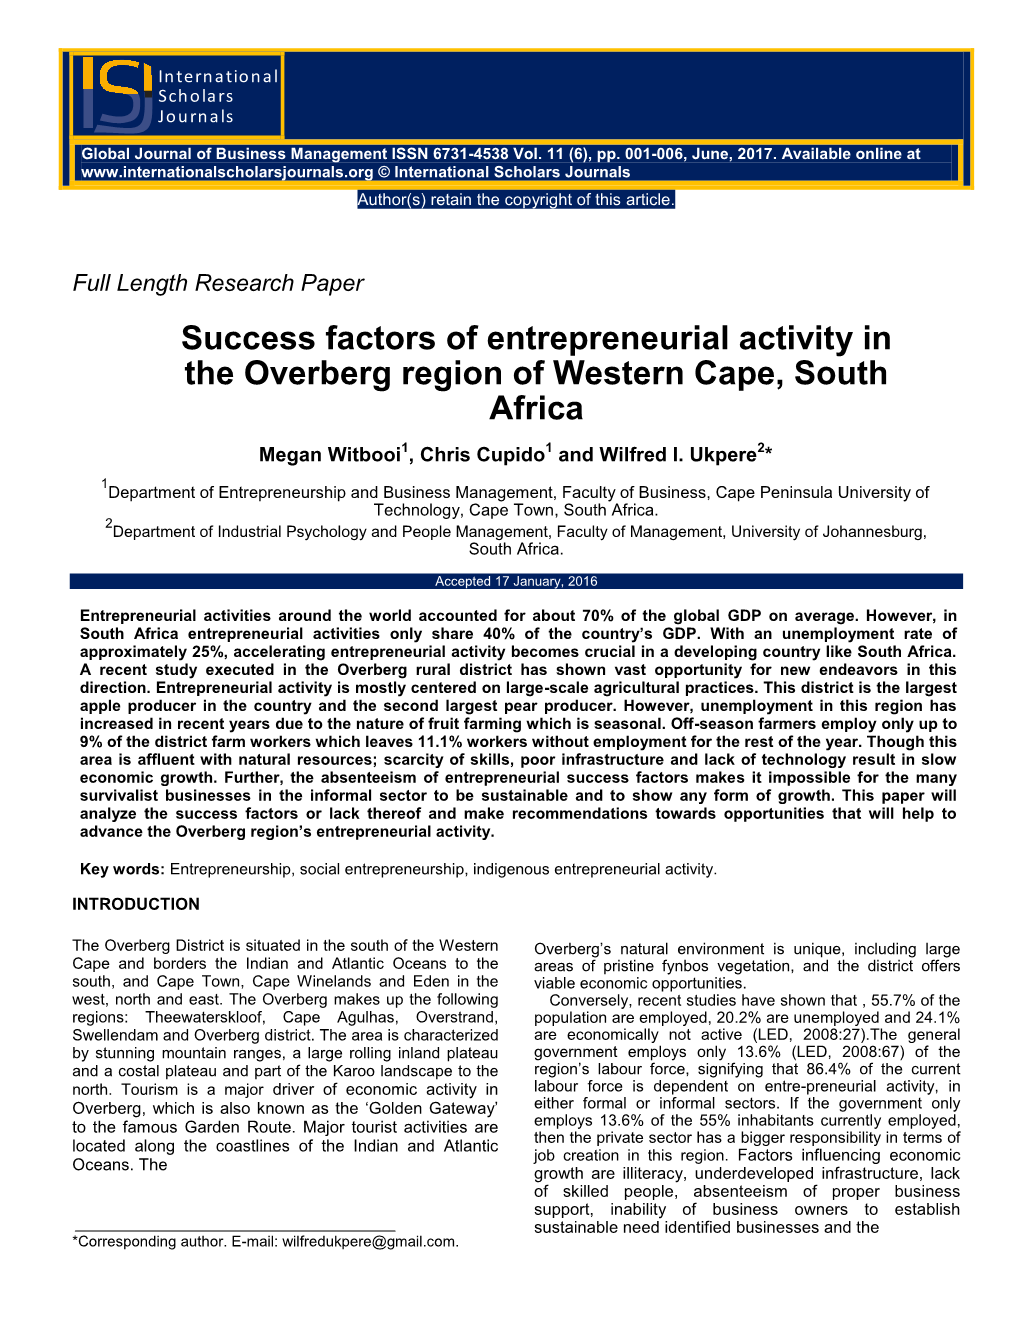 Success Factors of Entrepreneurial Activity in the Overberg Region of Western Cape, South Africa